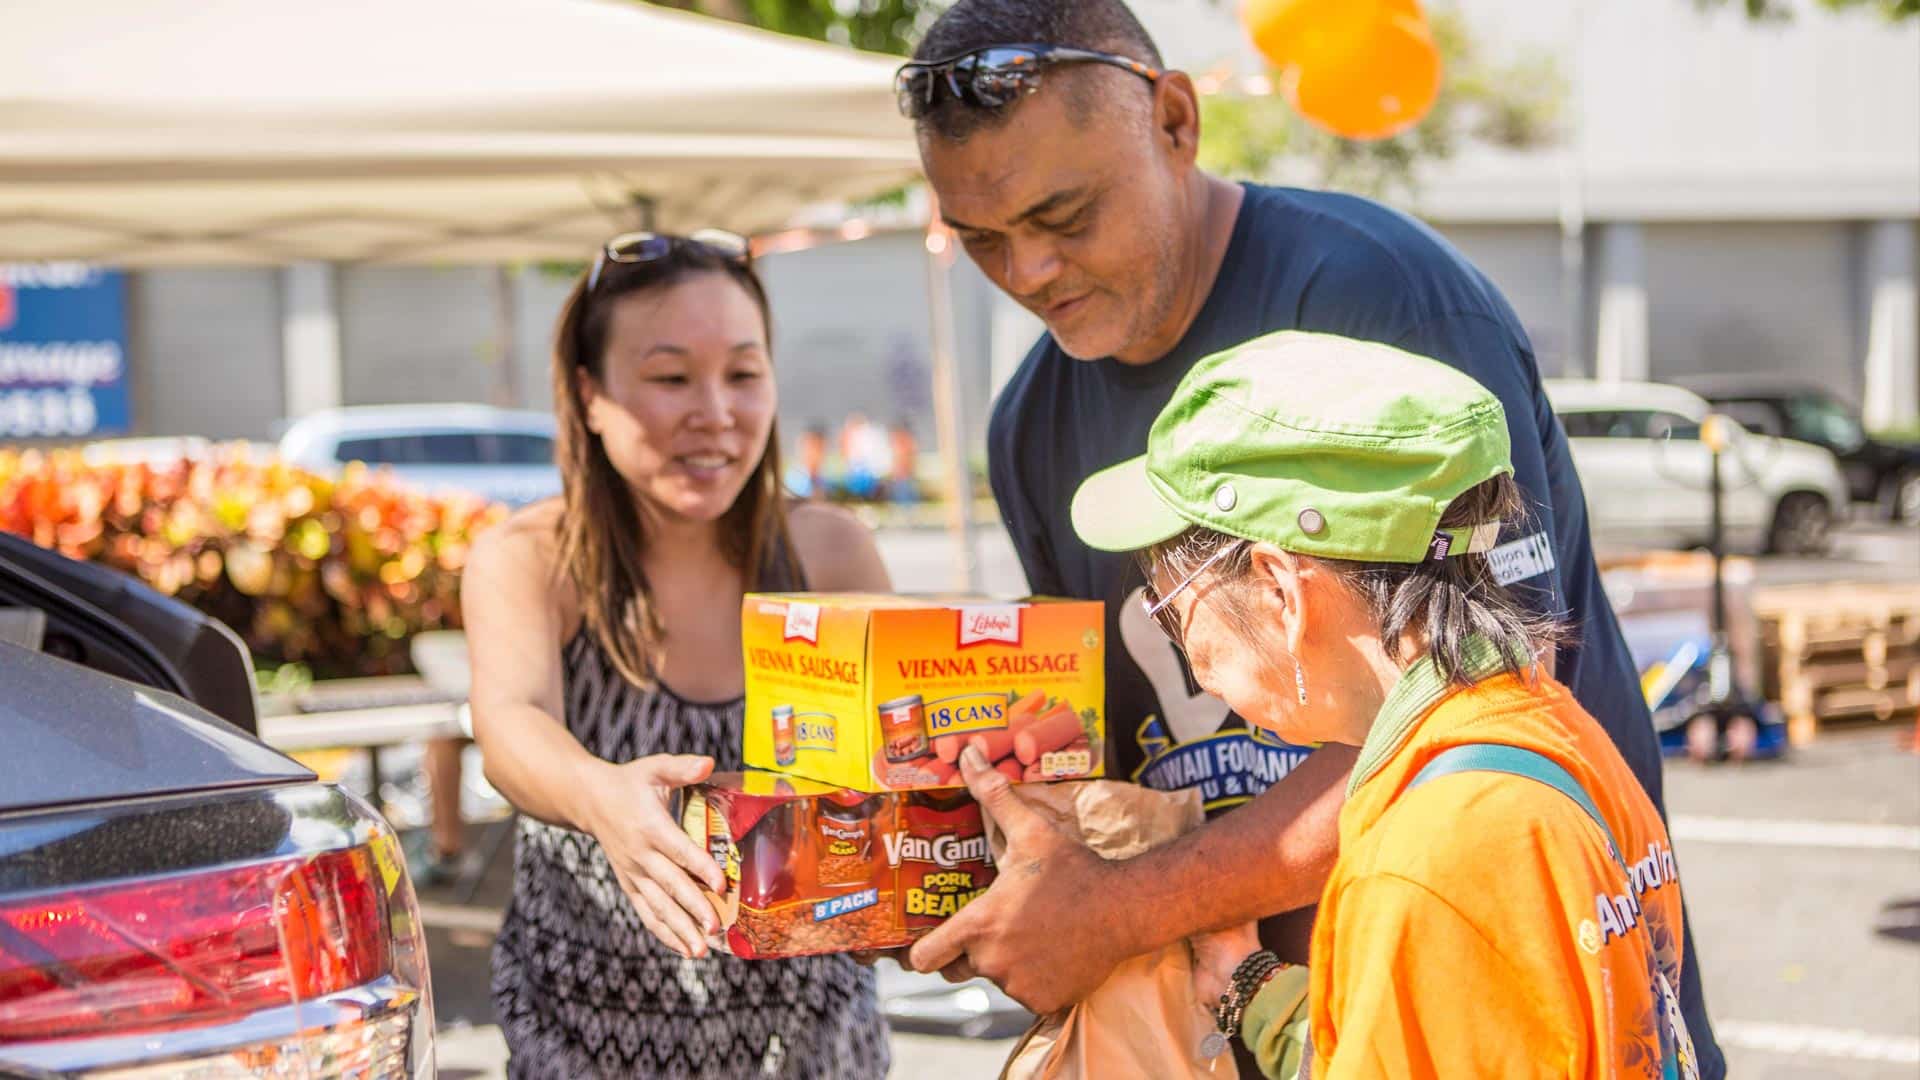 Hawaii Foodbank volunteers providing nourishment and hope, handing out food to residents in need.